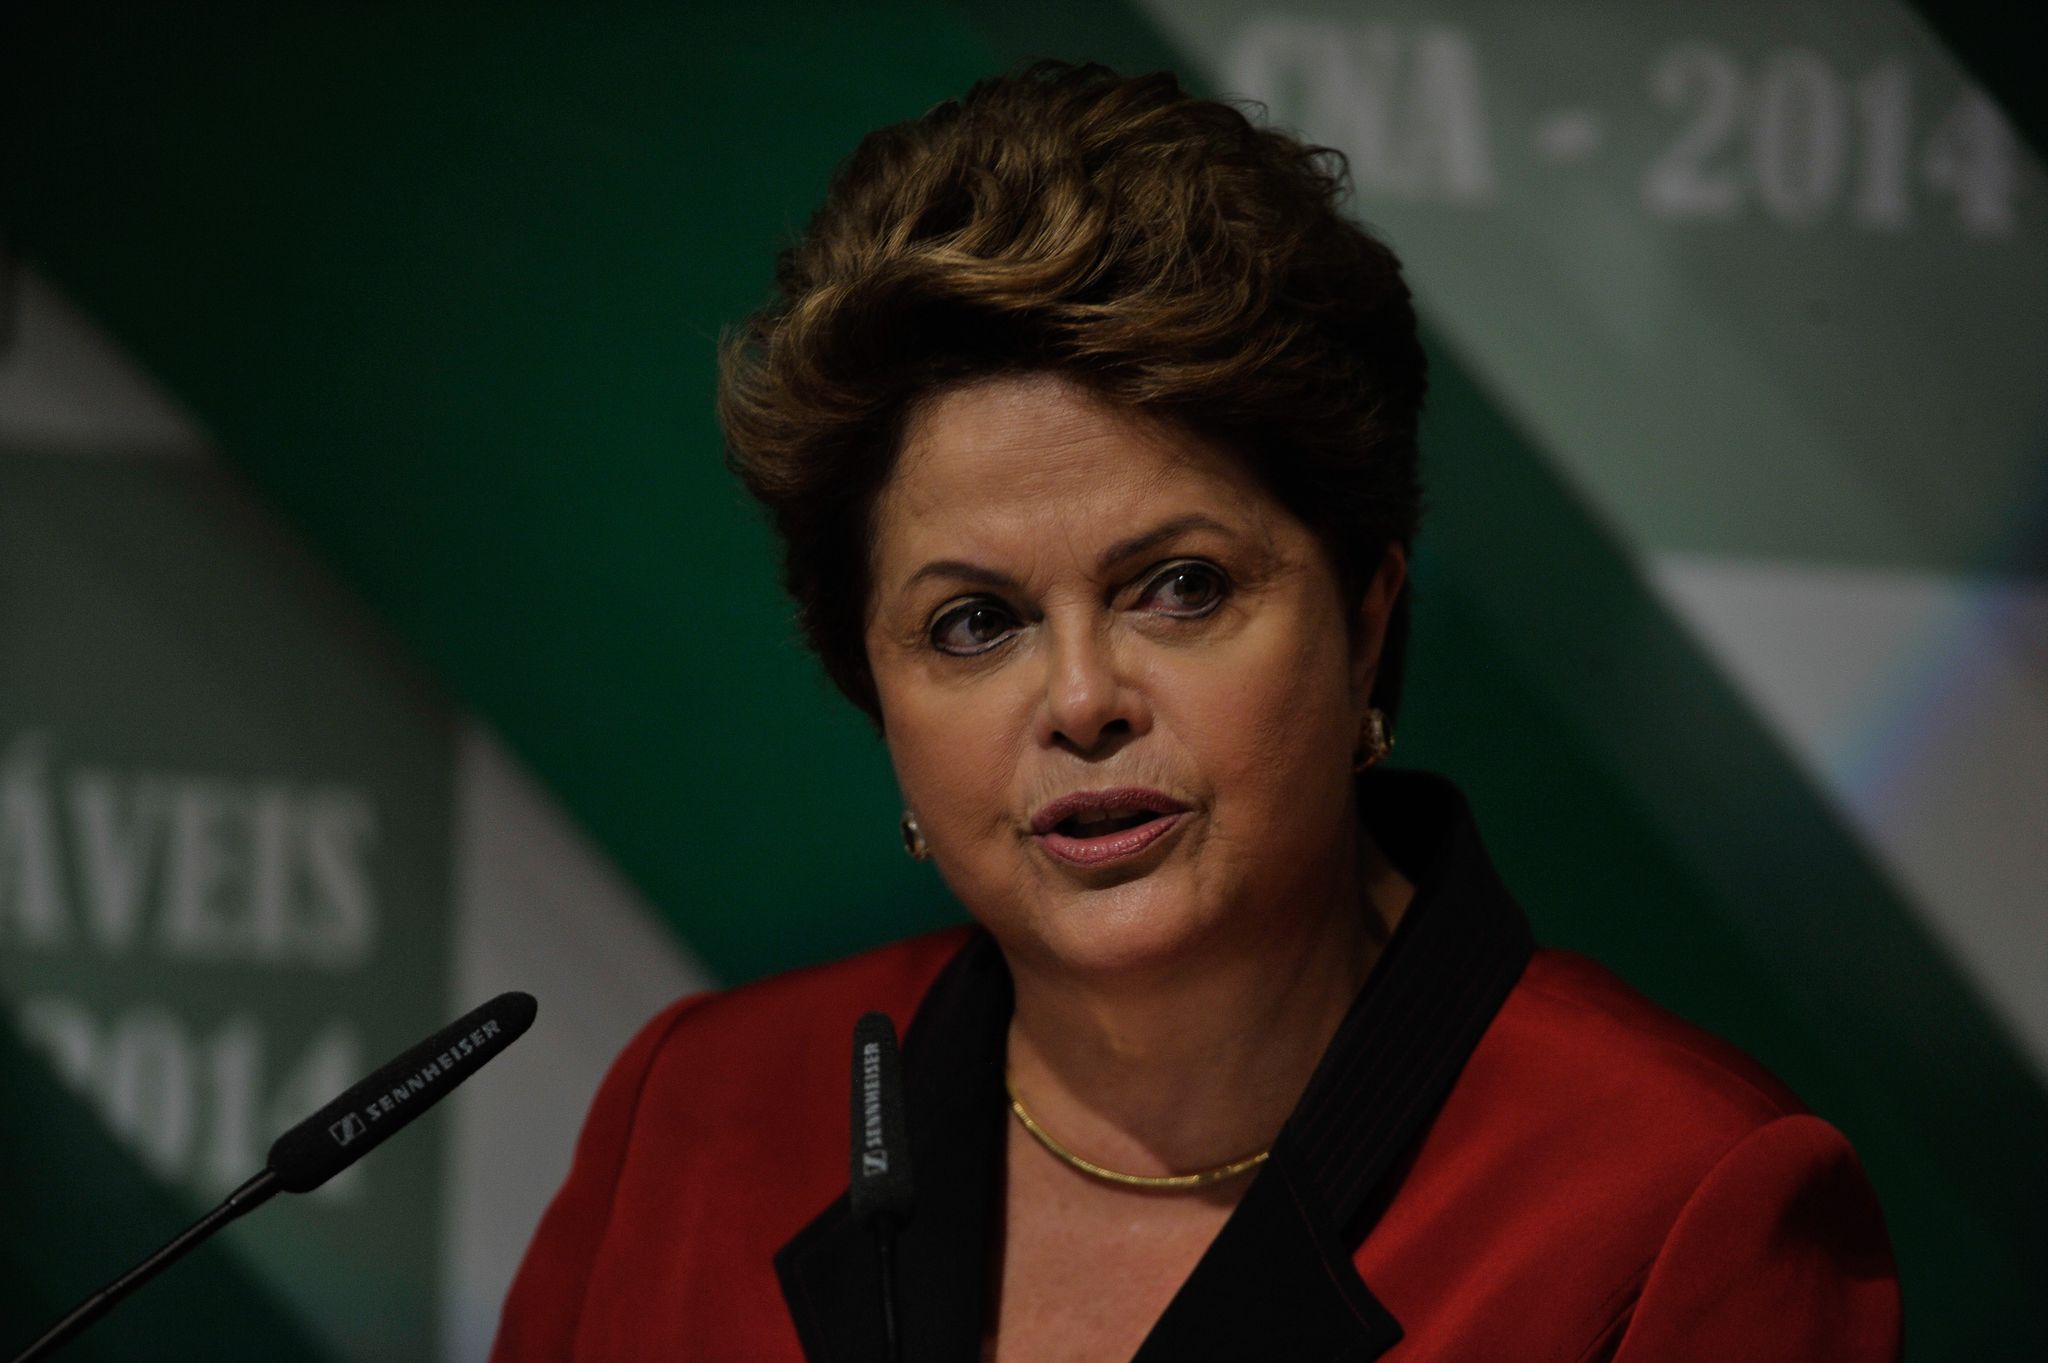 Dilma Rousseff tries to win re-election